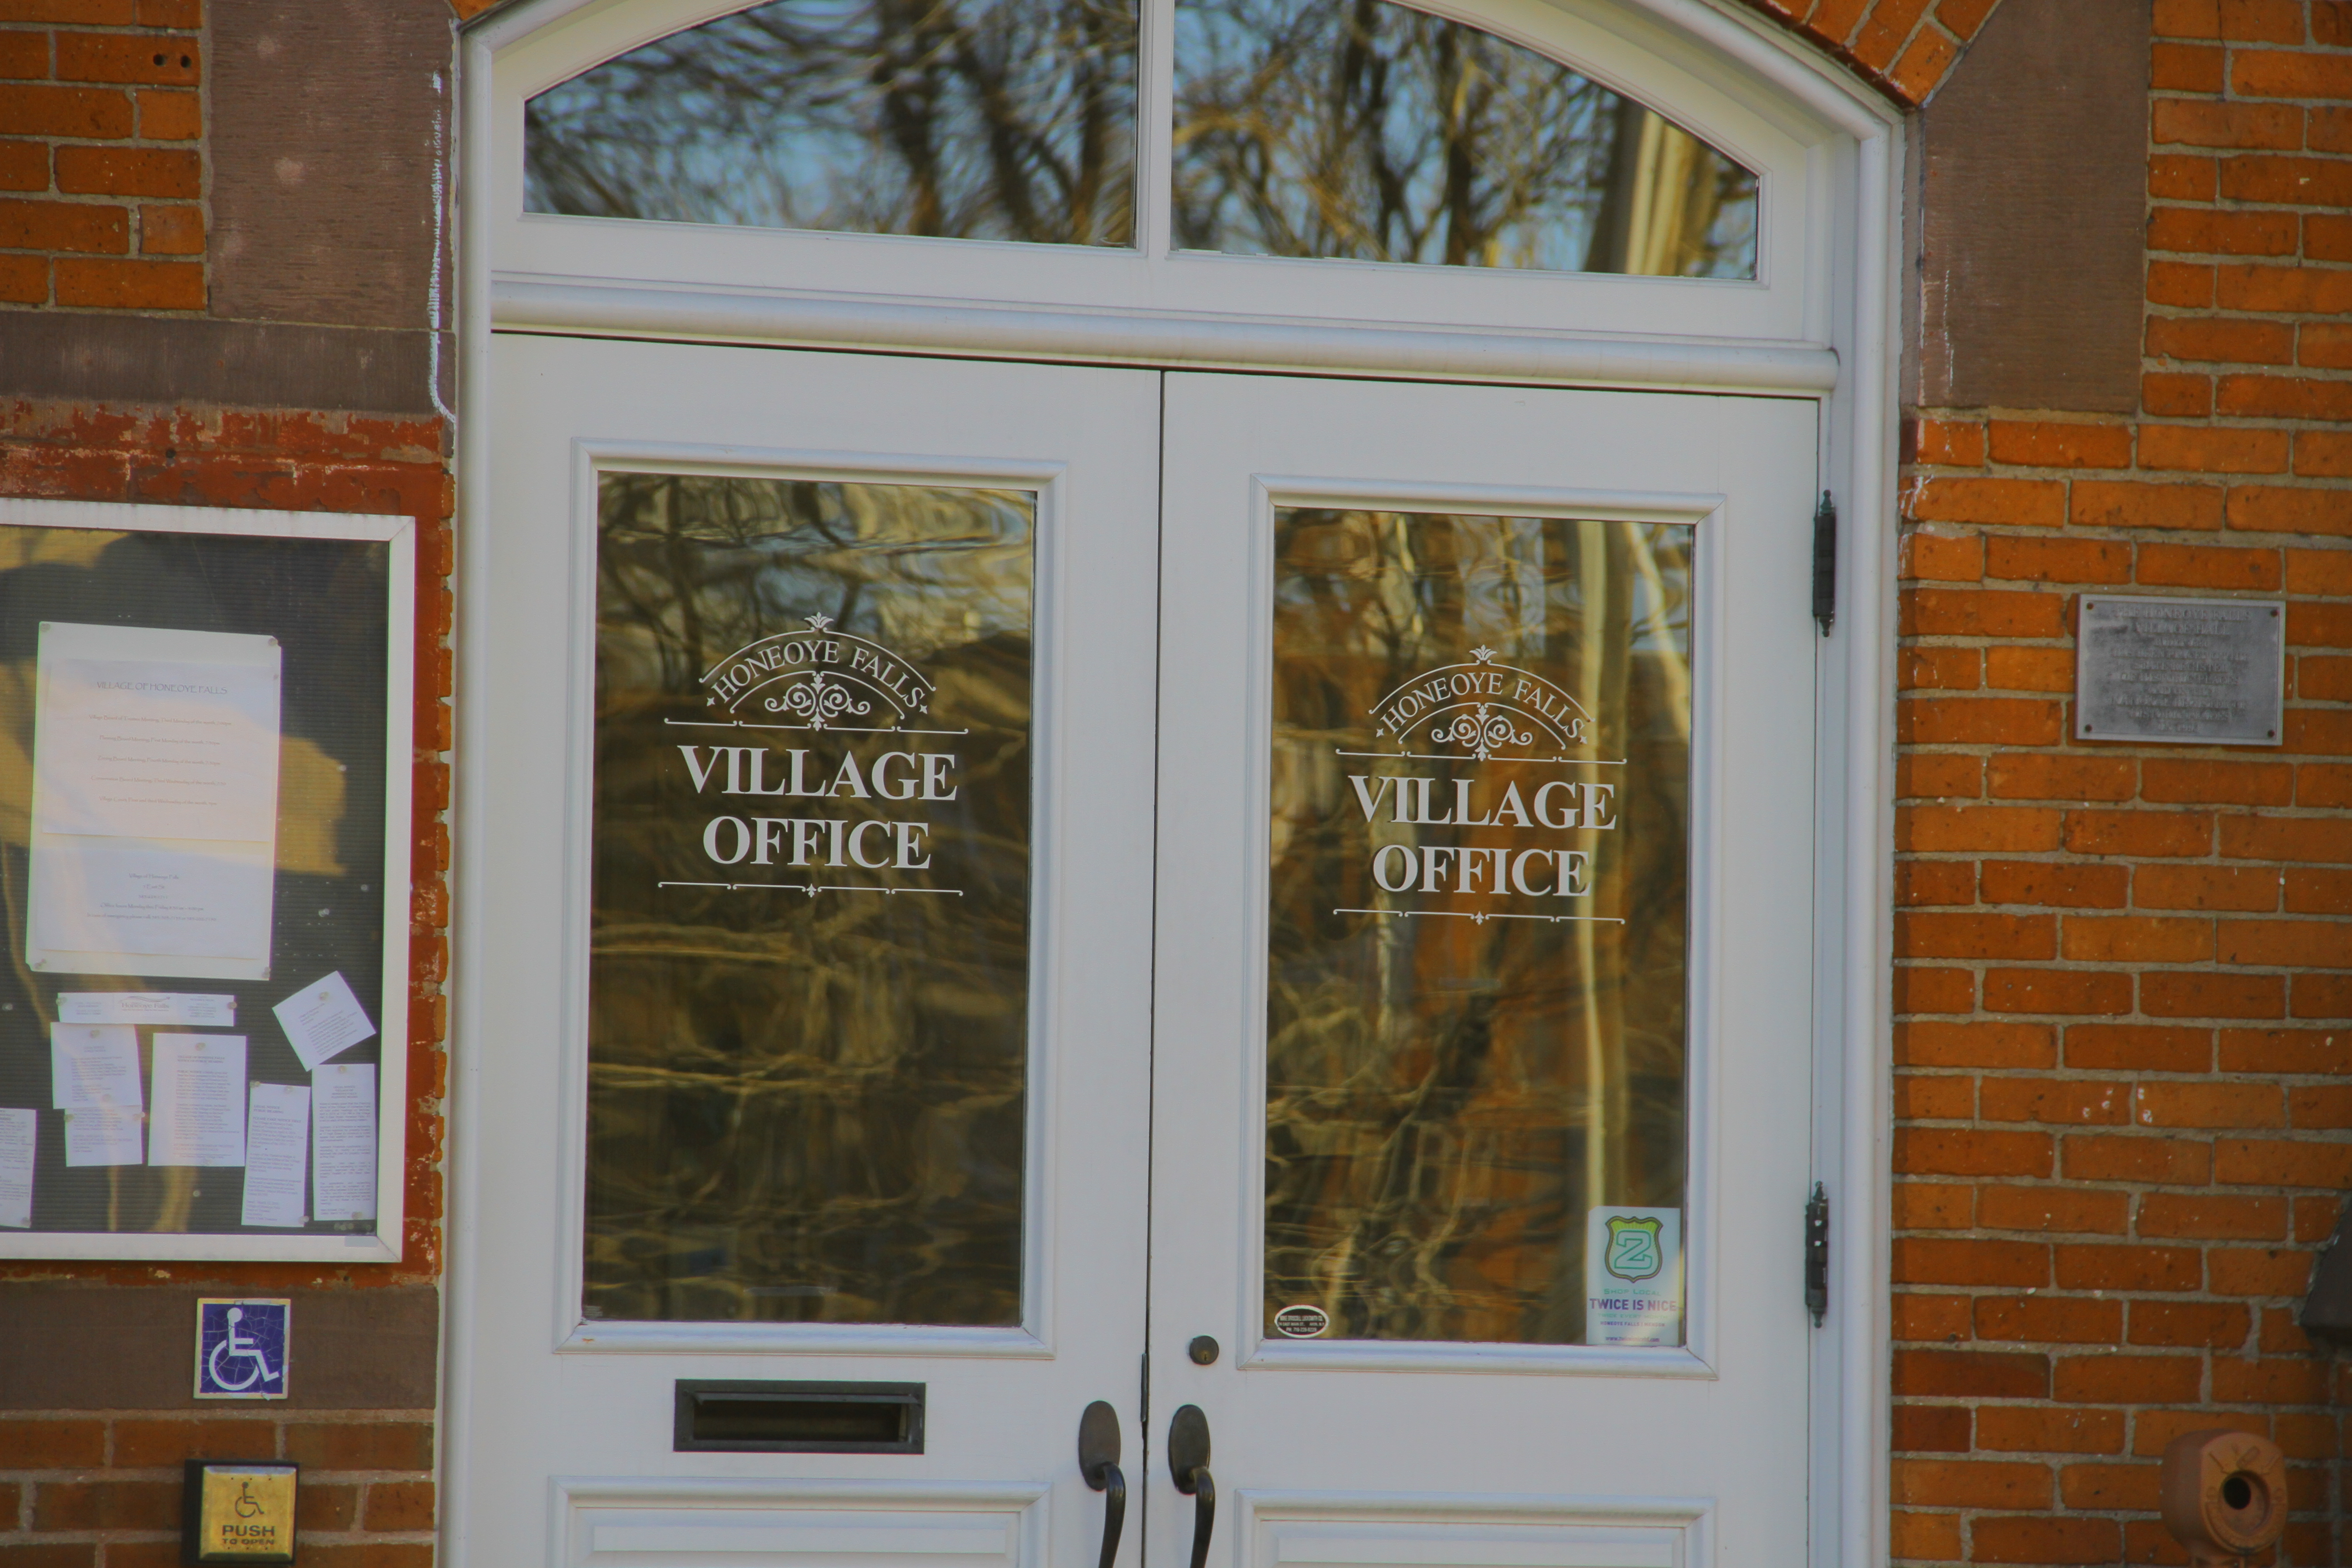 Presentation Planned For HF Board Meeting On Making Village A Hub For Green Technology